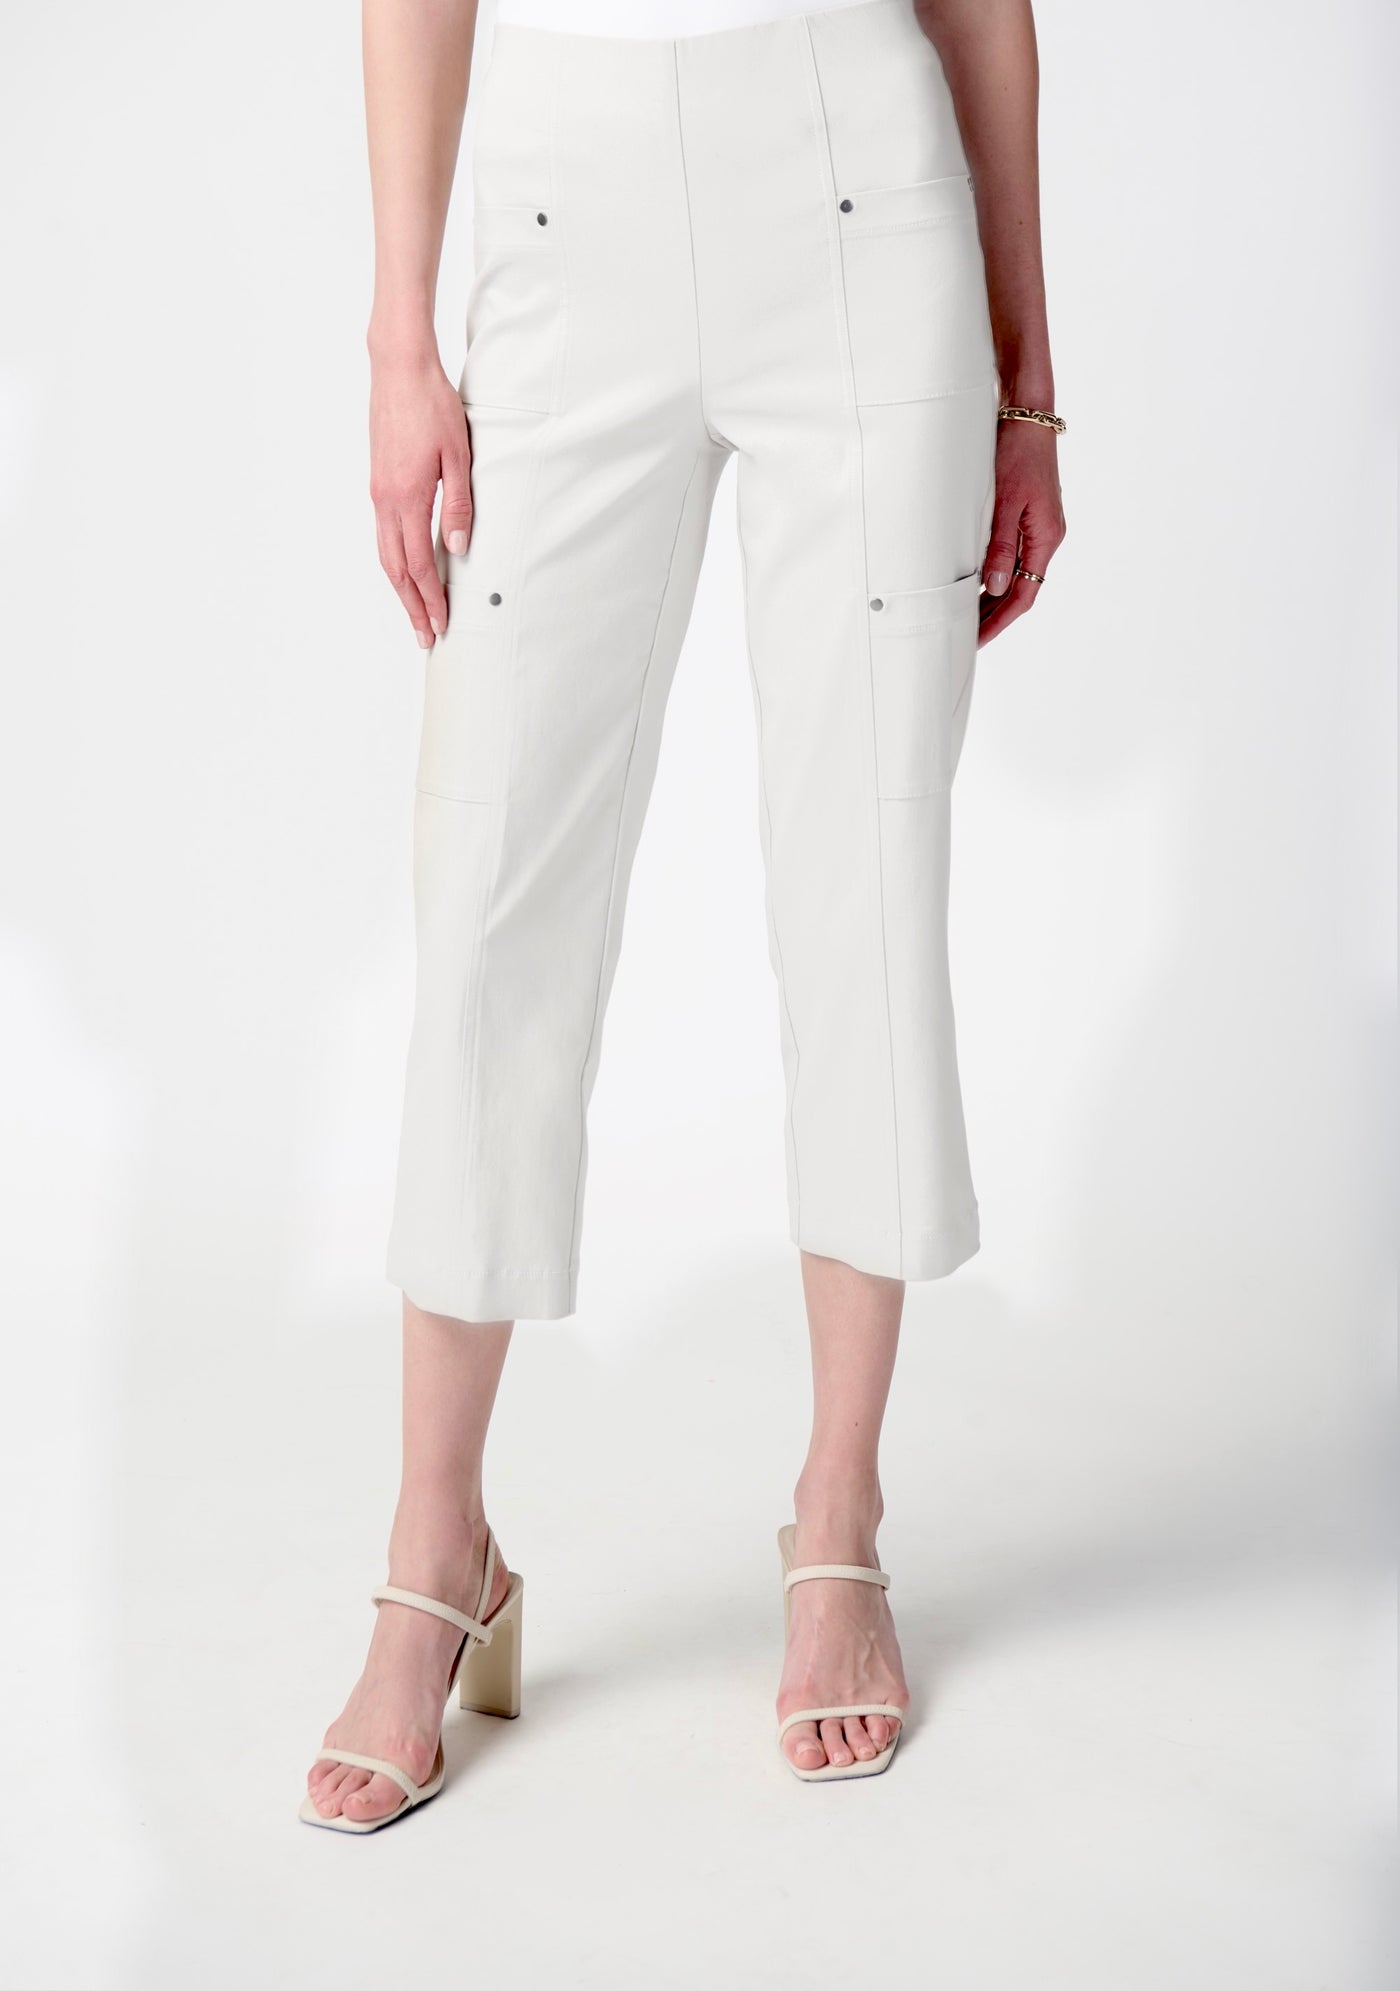 Joseph Ribkoff White Crop Pants with Side Pockets